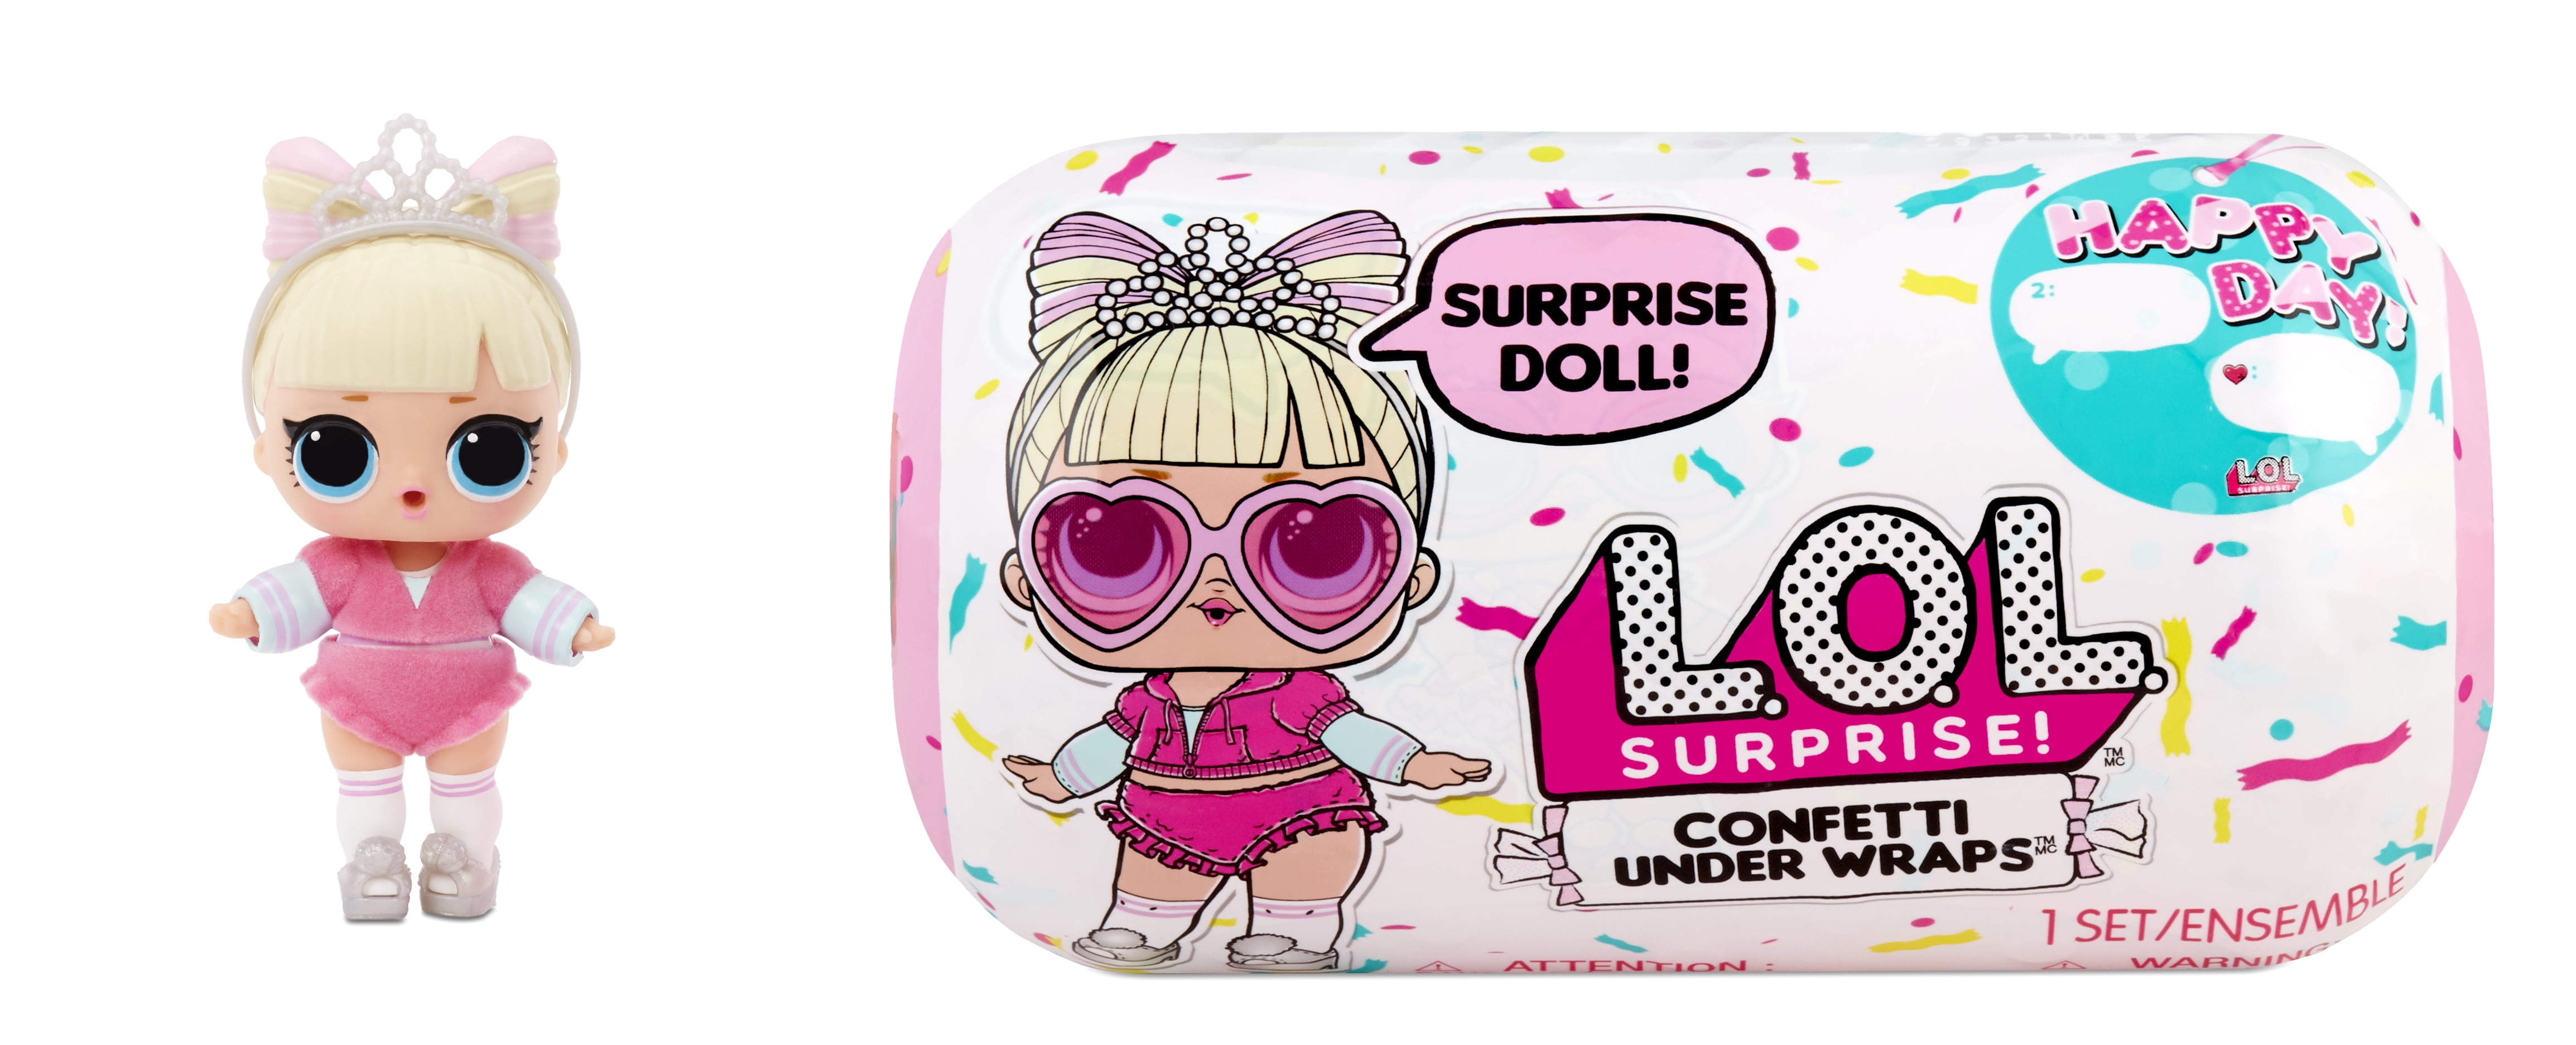 1 LOL Surprise Present Party Confetti Under Wraps Series Big Sister Doll New! 